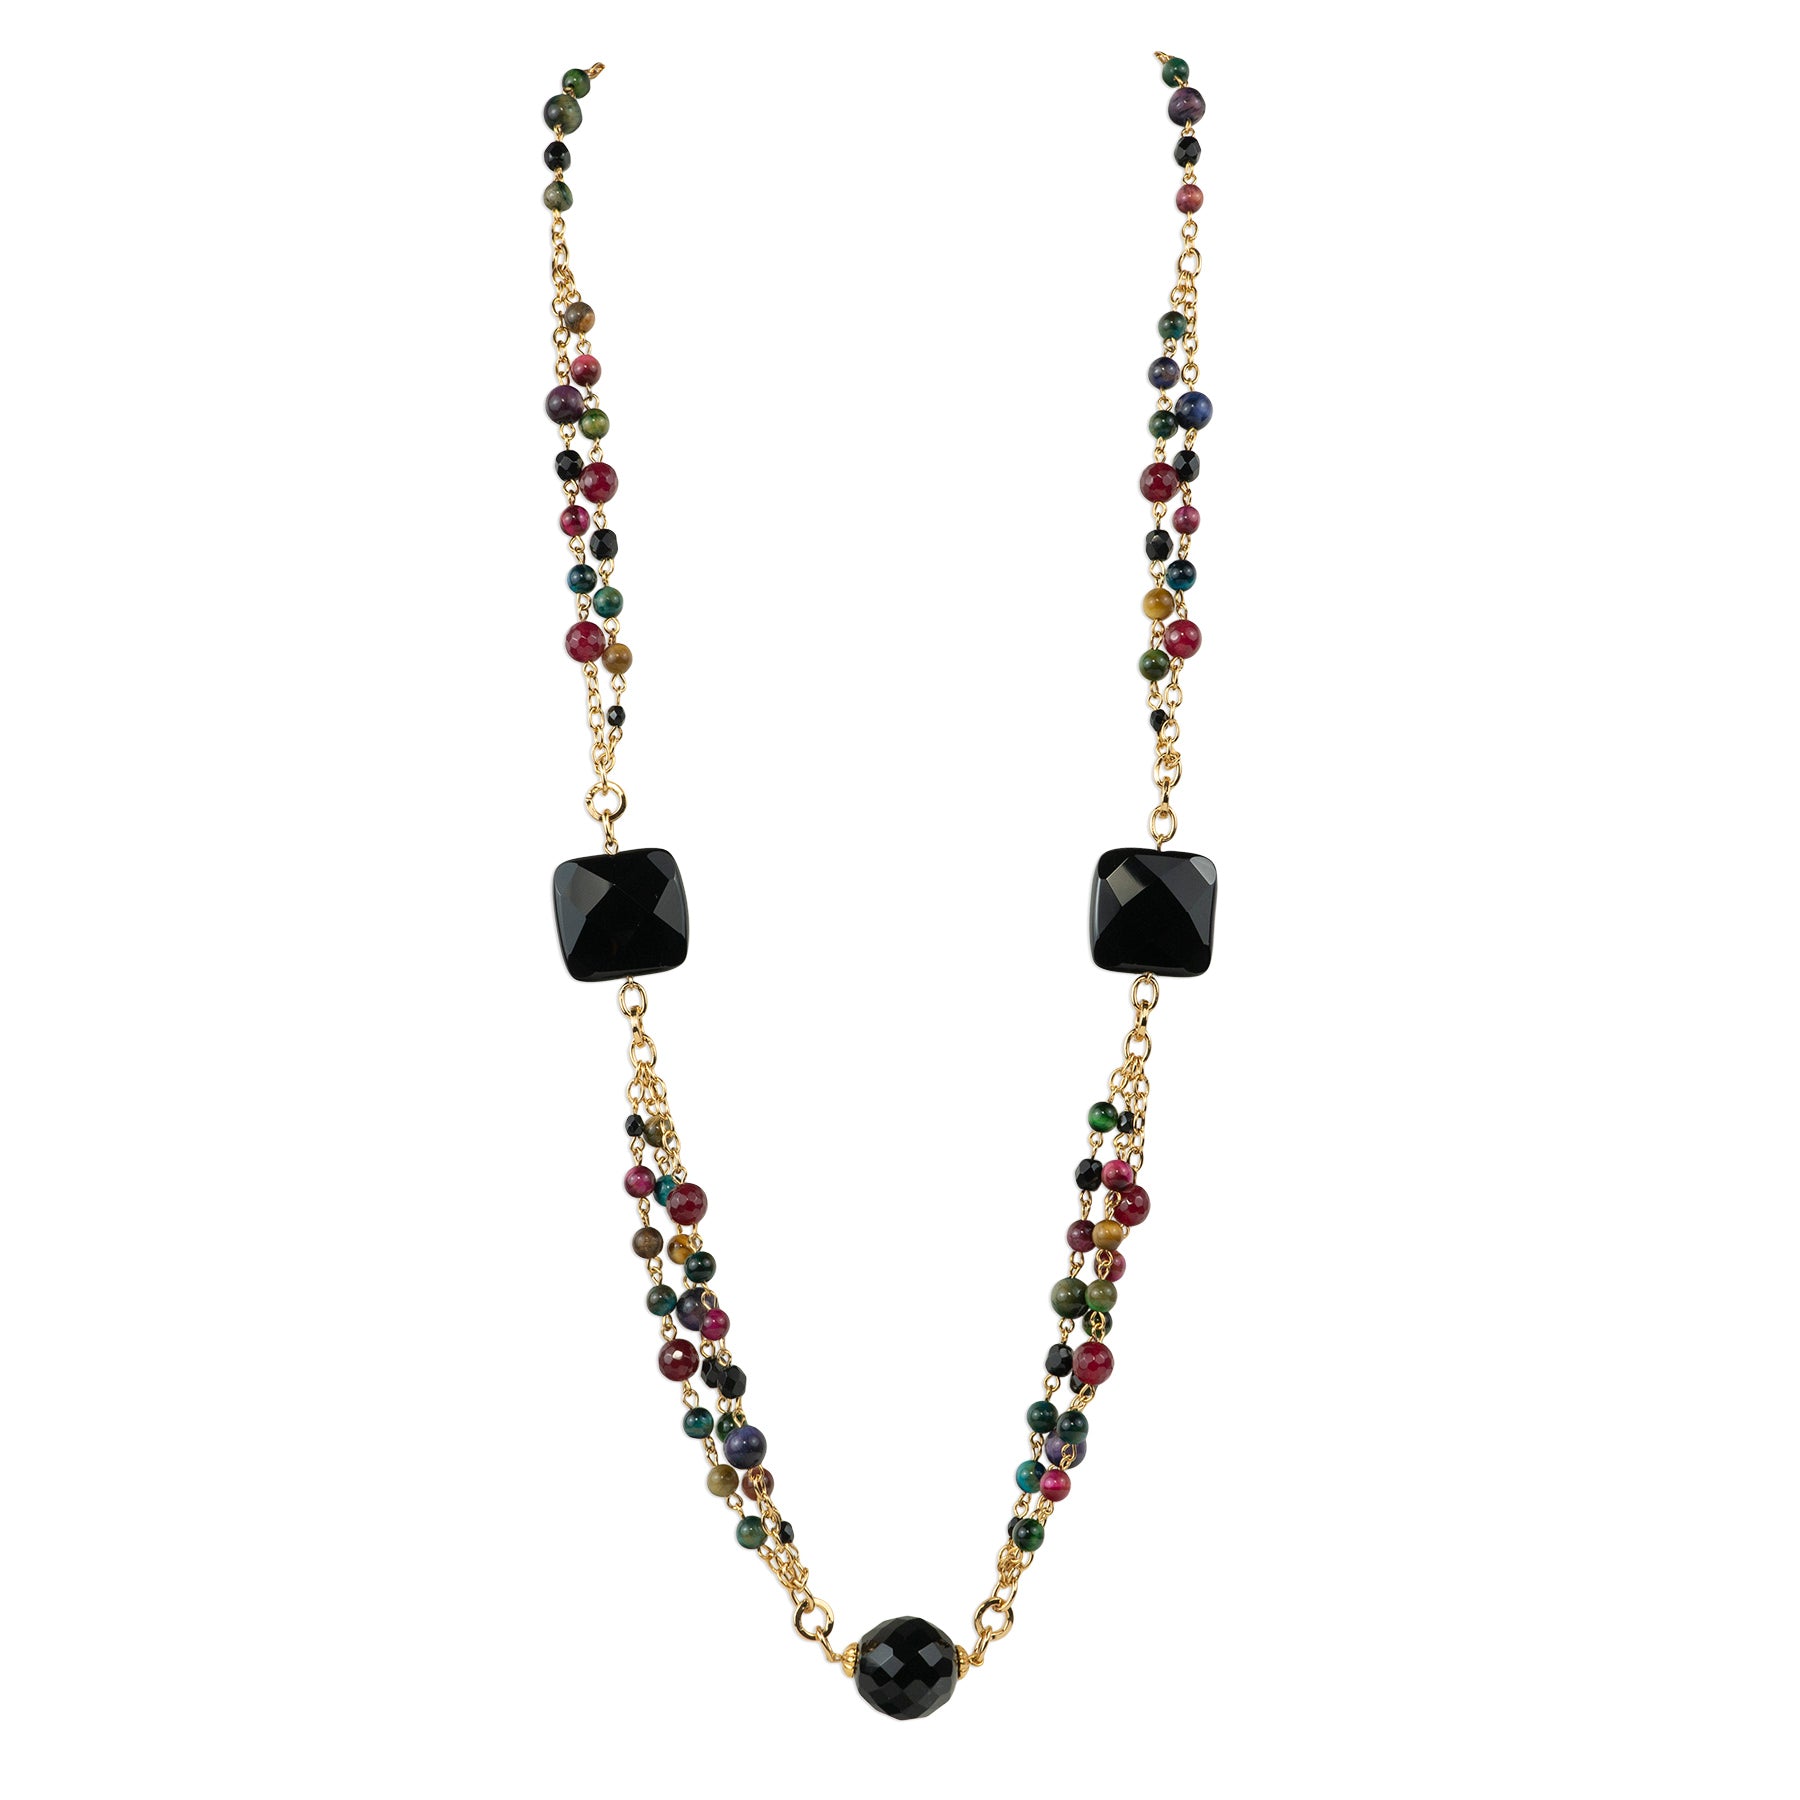 Long multi-strand necklace with semi-precious stones and crystal